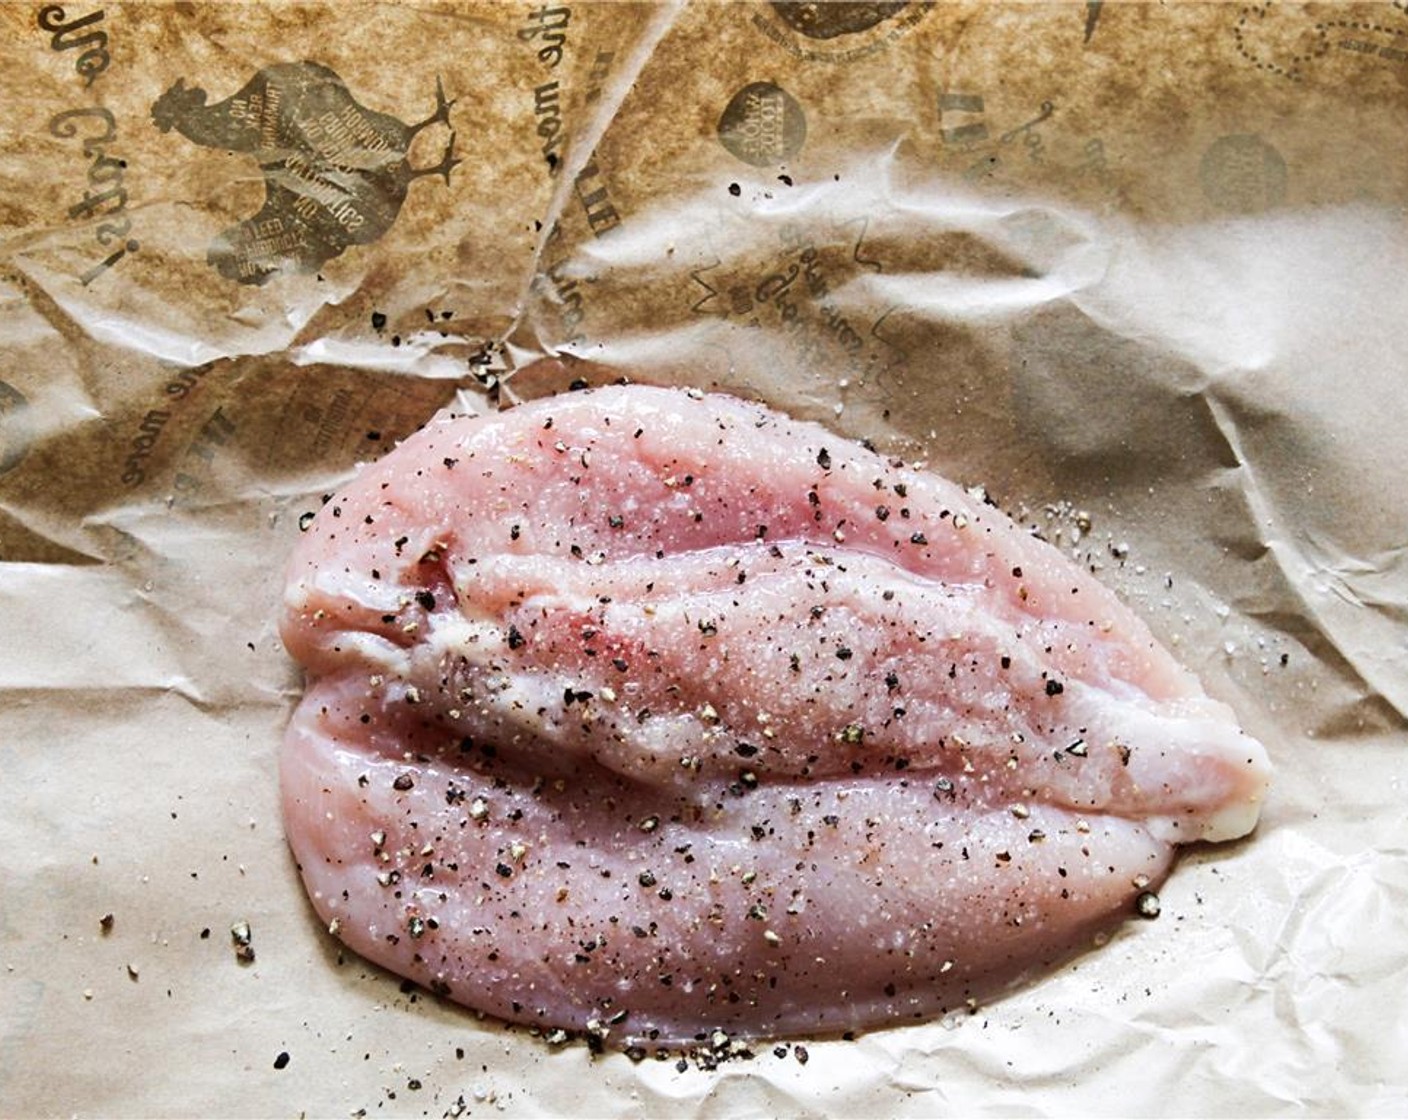 step 2 Season Boneless, Skinless Chicken Breasts (8 oz) with Salt (to taste) and Ground Black Pepper (to taste) and set aside at room temperature.